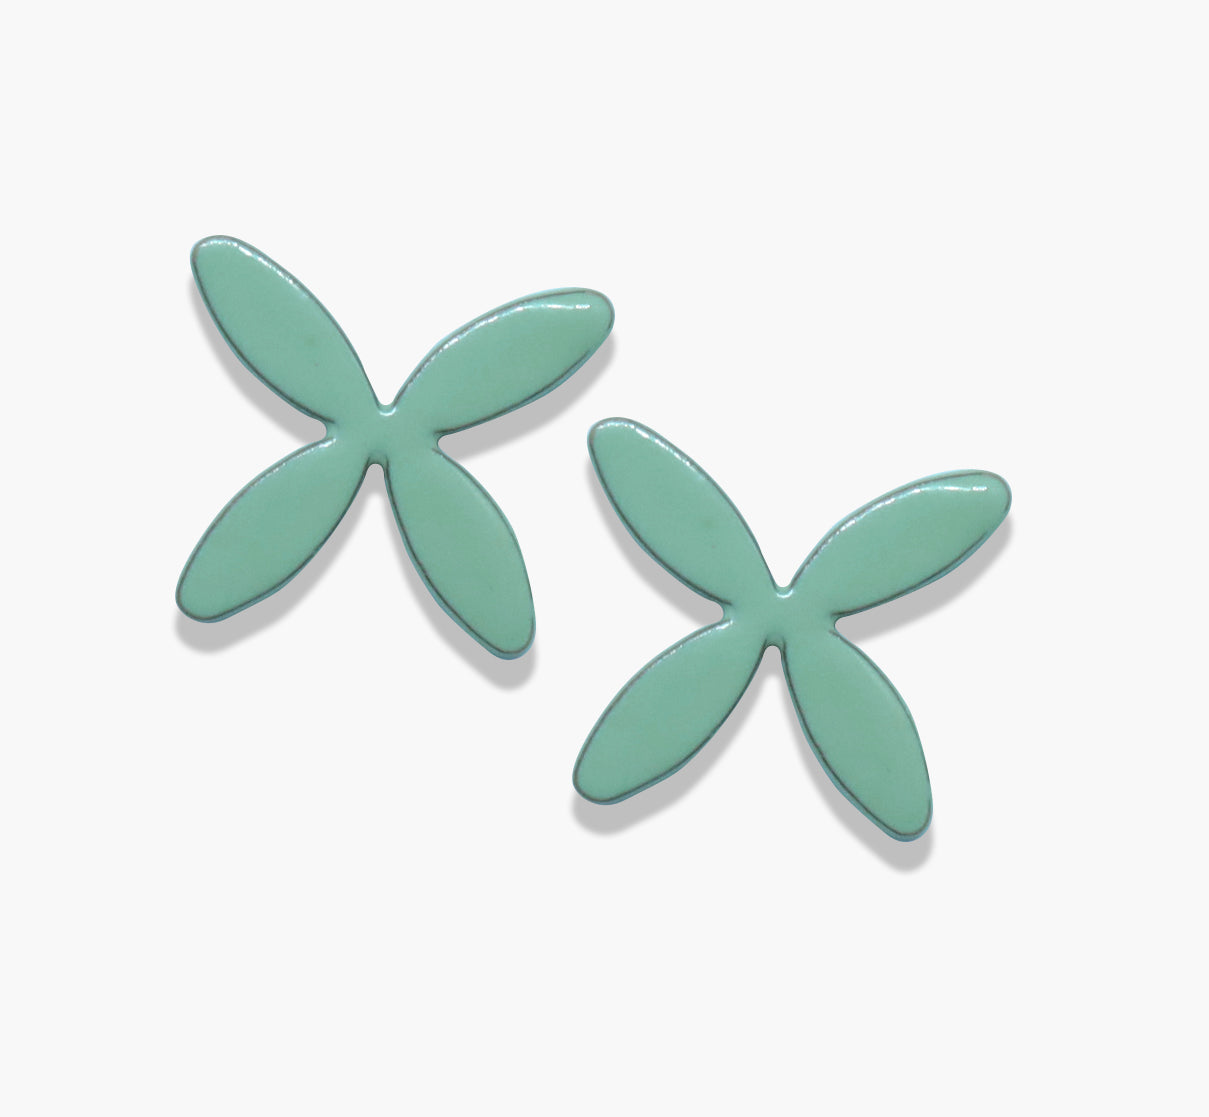 Spring-ready Petal Stud Earrings by Sorrel Van Allen. Adorably petite with a 4-petal open flower design. Crafted from powder-coated brass with sterling silver ear posts and backs. Extra lightweight at 0.5g each, ideal for smaller earlobes.